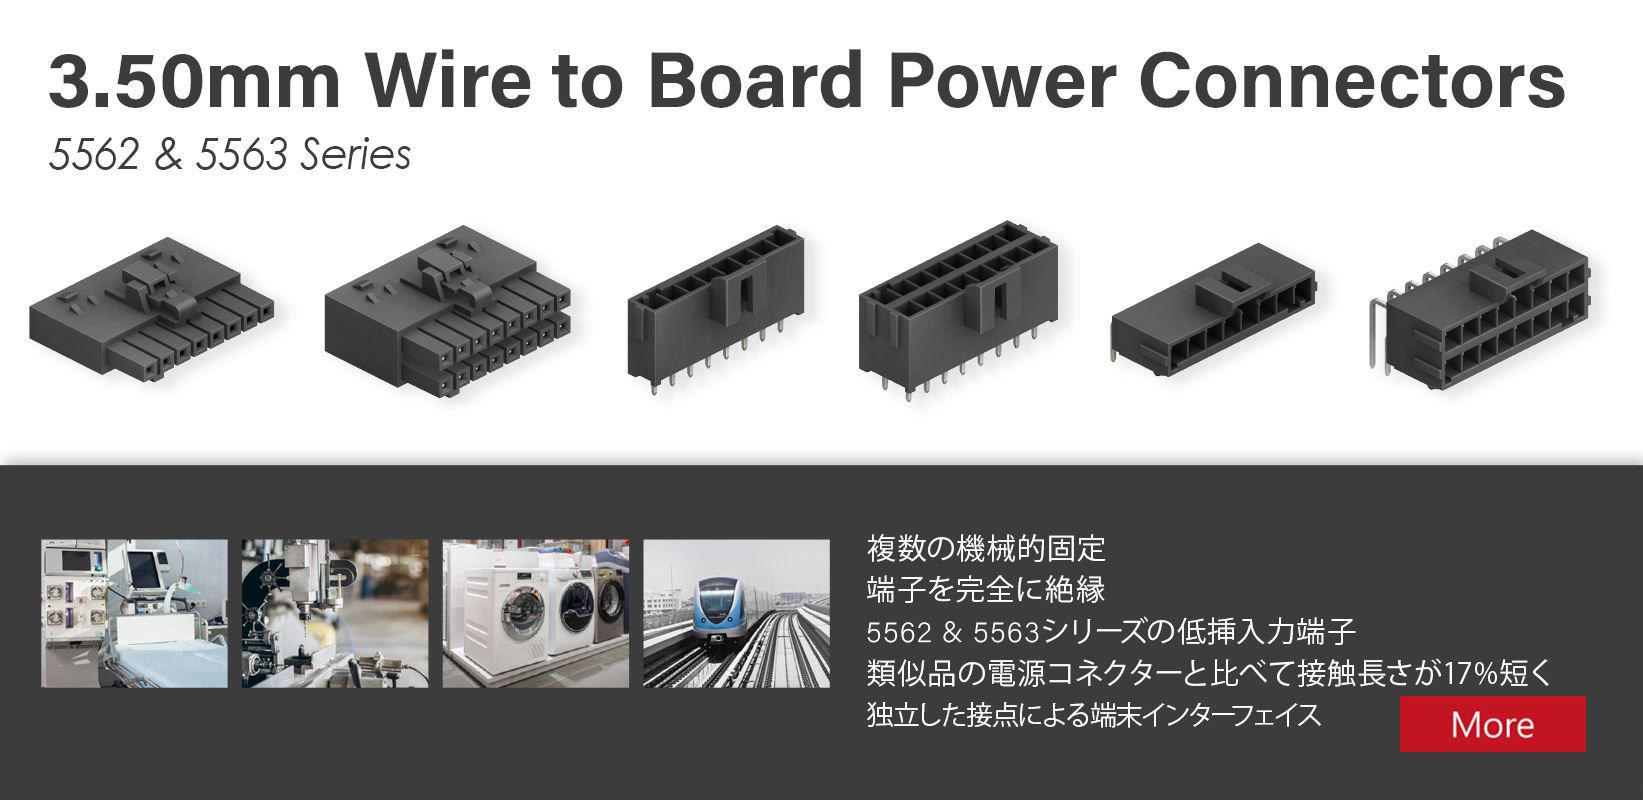 3.50mm Wire to Board Power Connectors 5562 5563